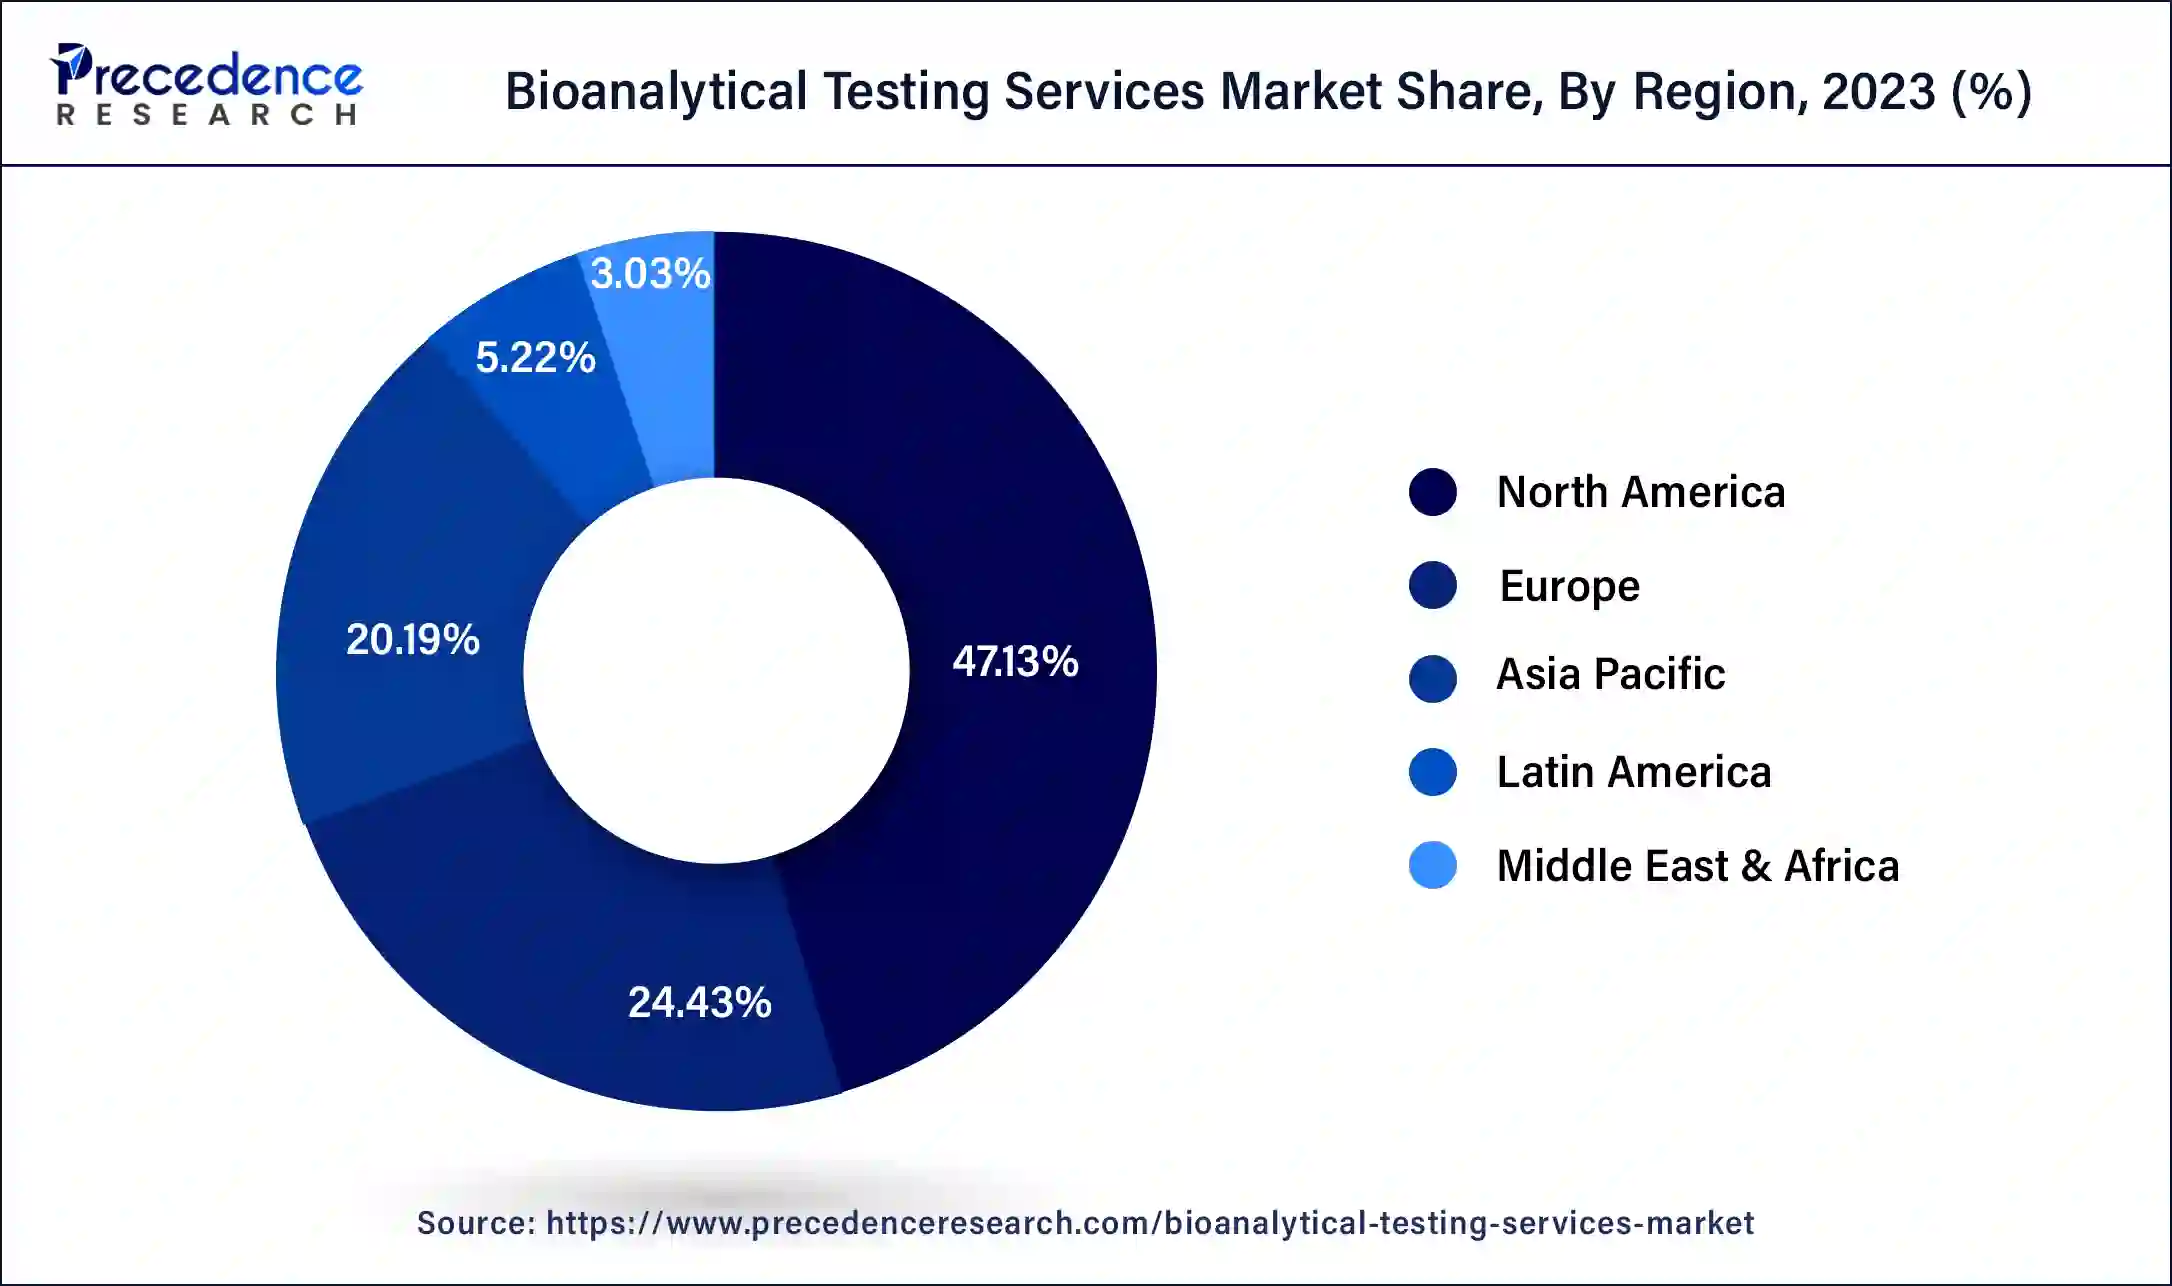 Bioanalytical Testing Services Market Share, By Region, 2023 (%)